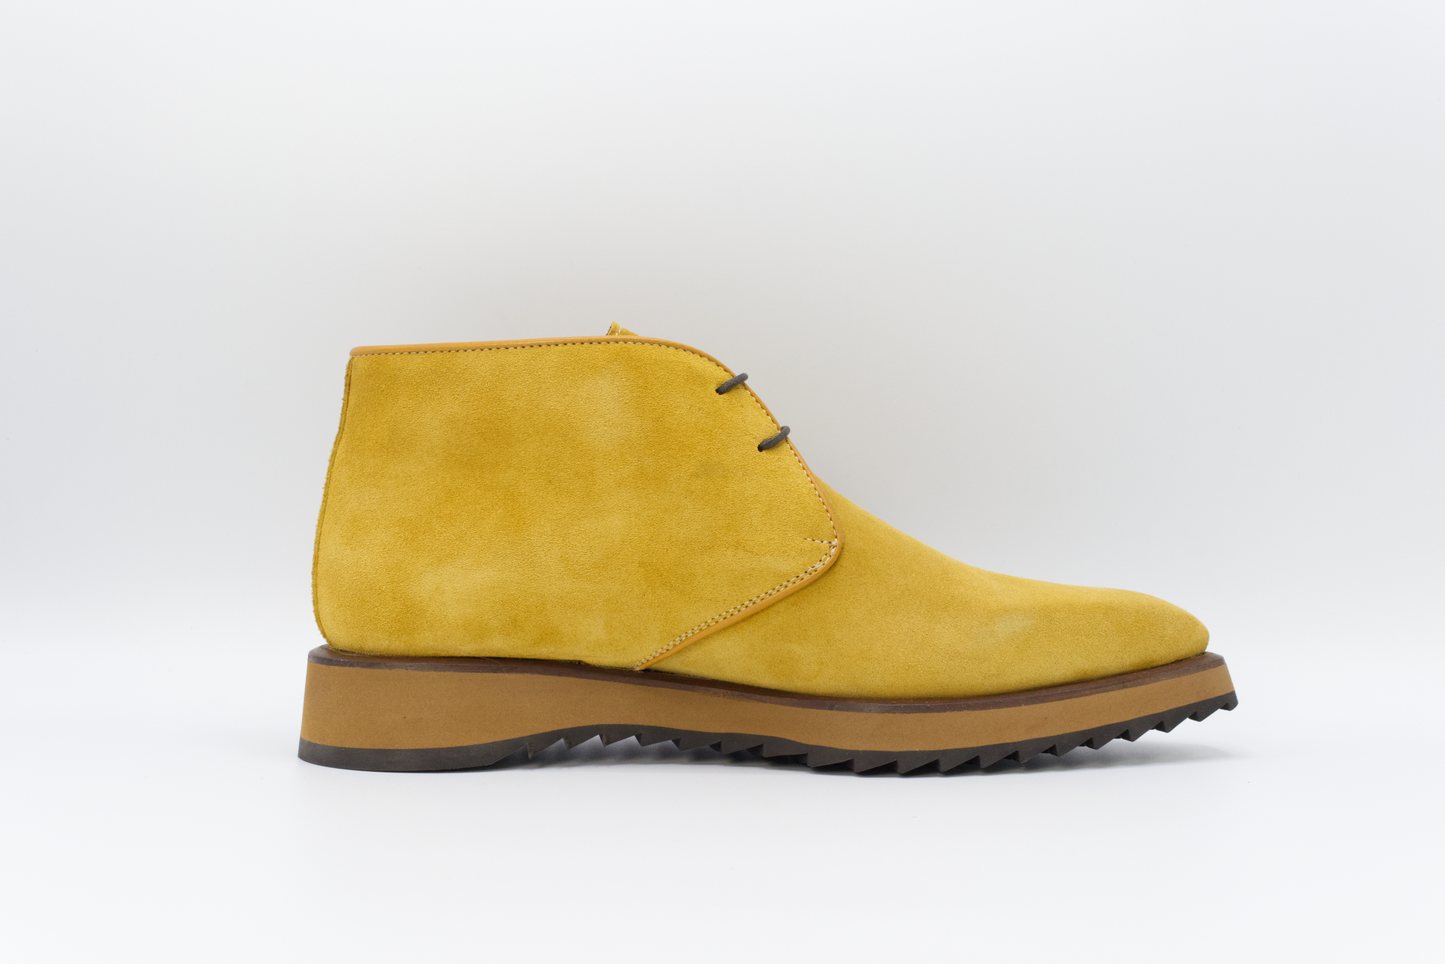 Shop Handmade Italian Suede Chukka Boot in Mustard or browse our range of hand-made Italian sneakers for men in leather or suede. We deliver to the USA and Canada & offer multiple payment plans as well as accept multiple safe & secure payment methods. Duedi01